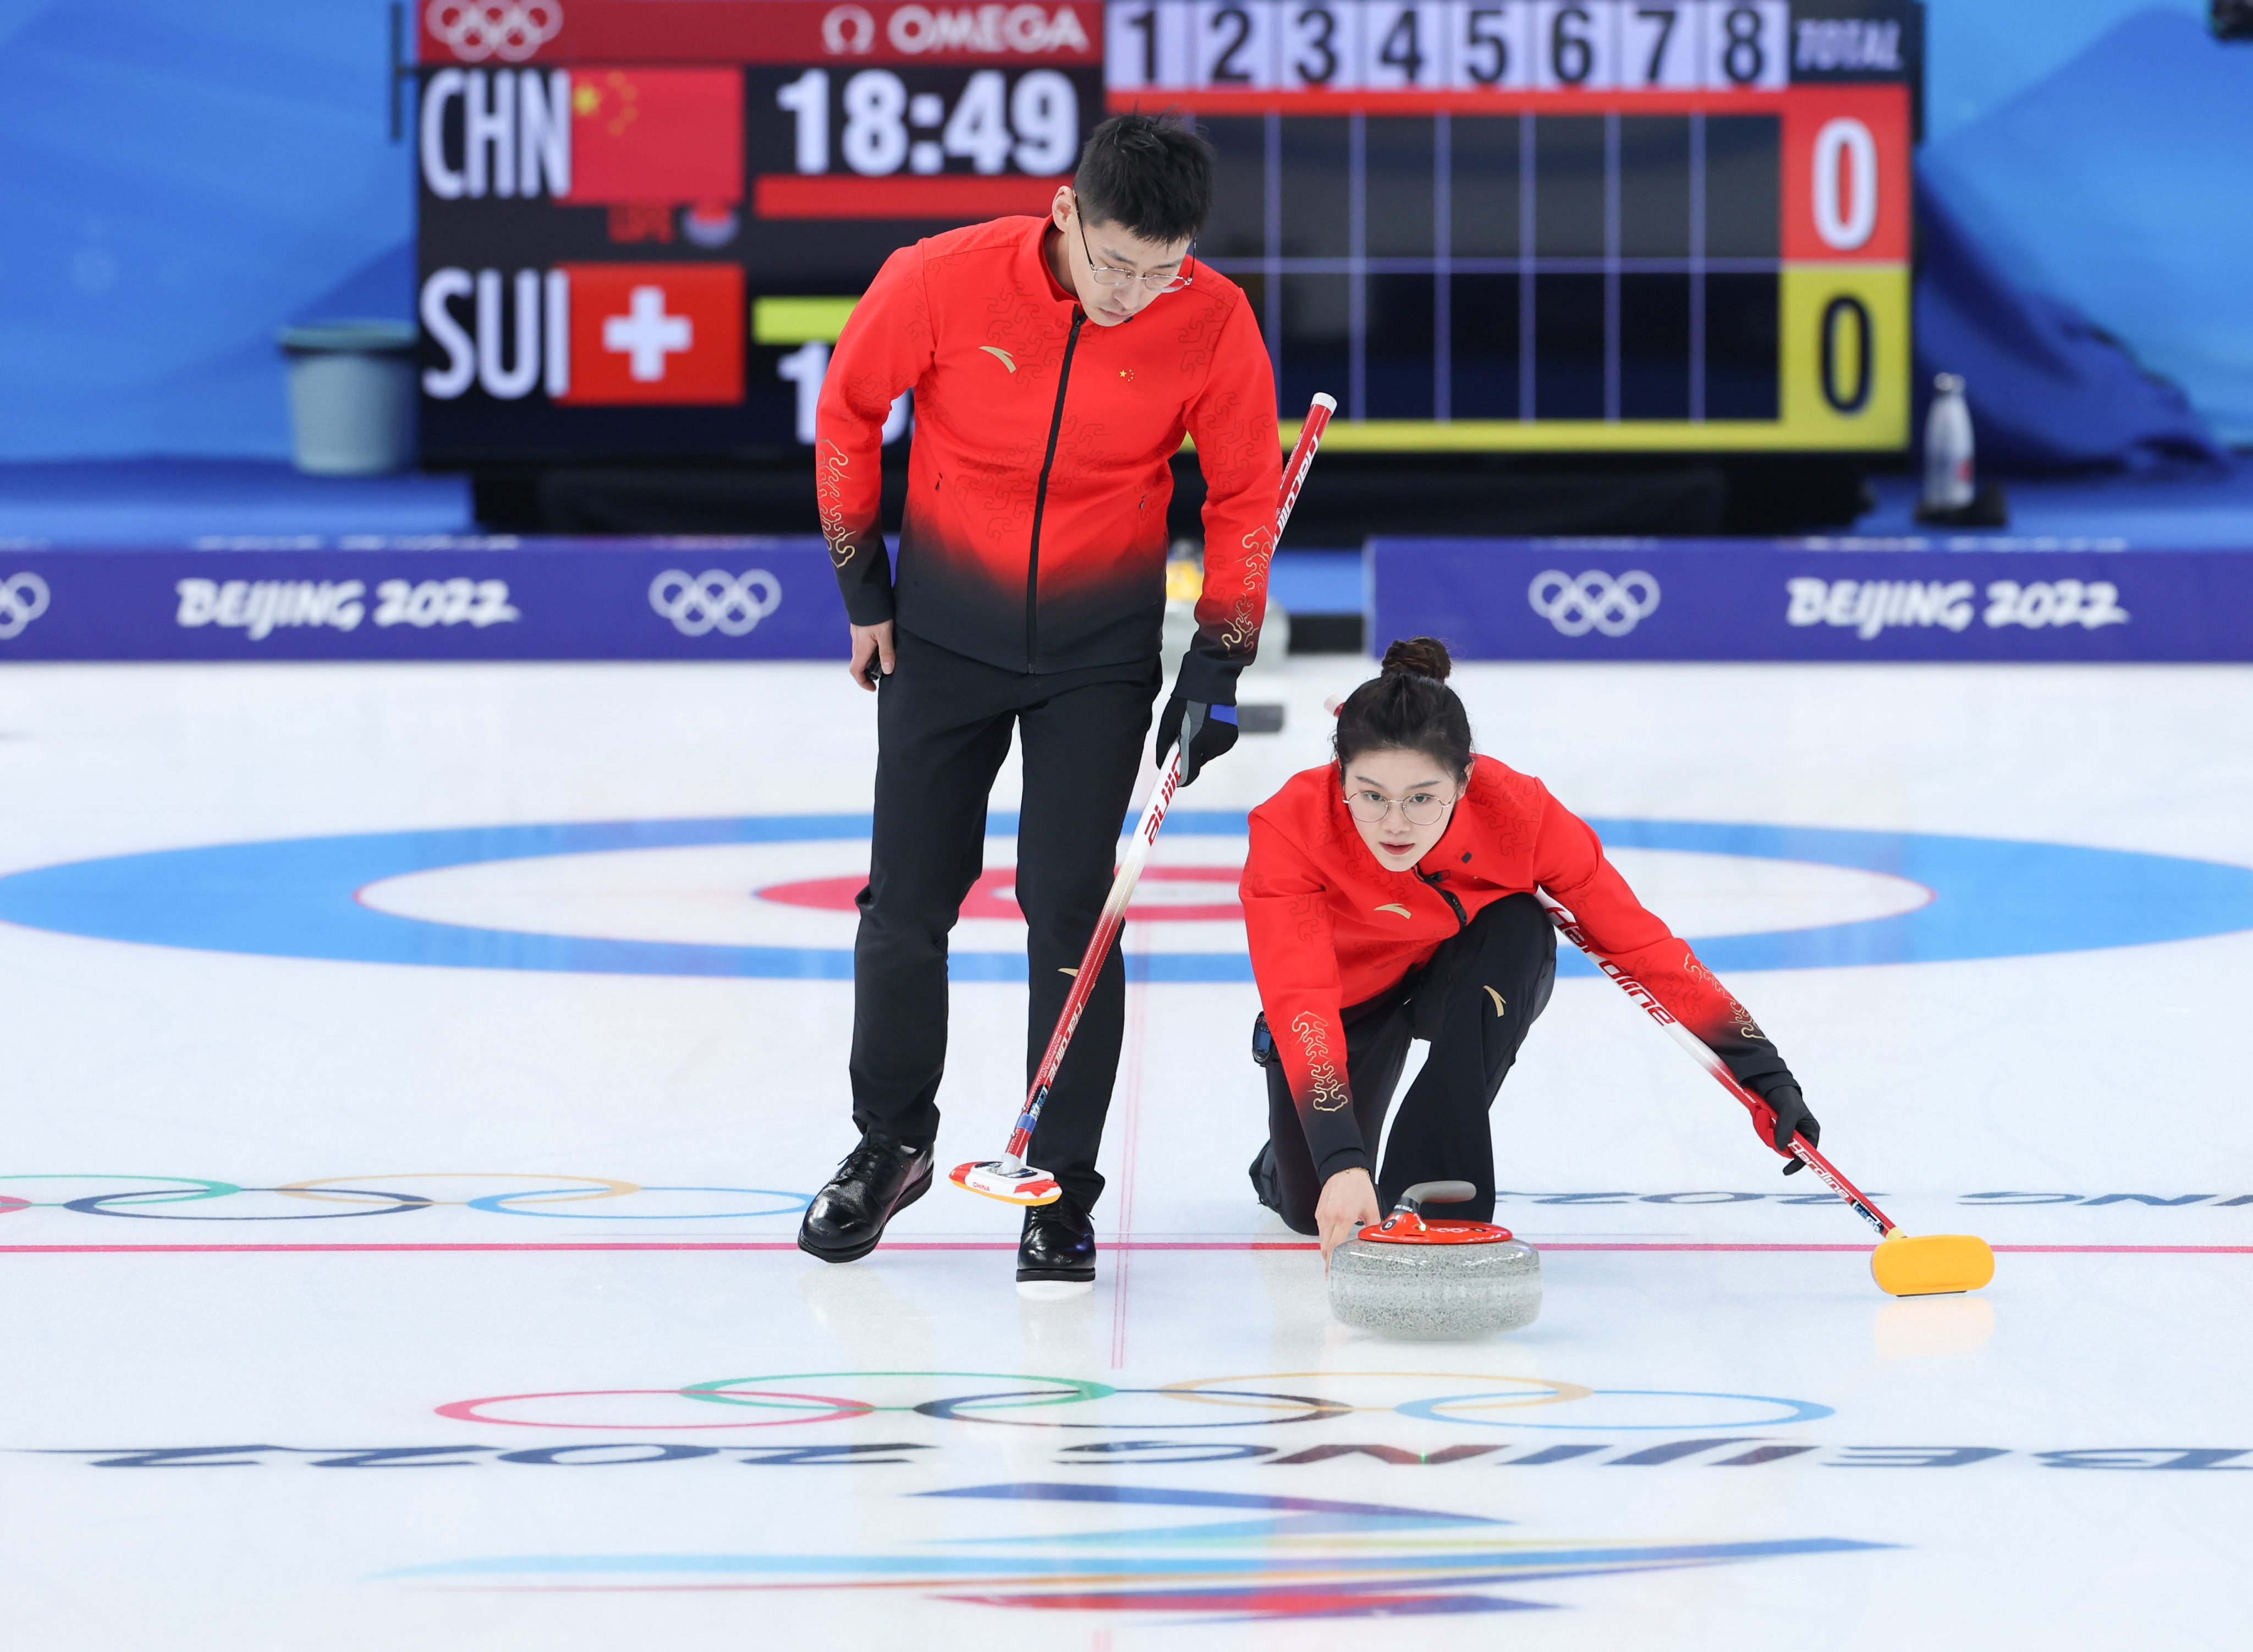 China’s Fan Suyuan (right) and Ling Zhi compete during the curling mixed doubles round robin session of the Winter Olympics. Photo: Xinhua